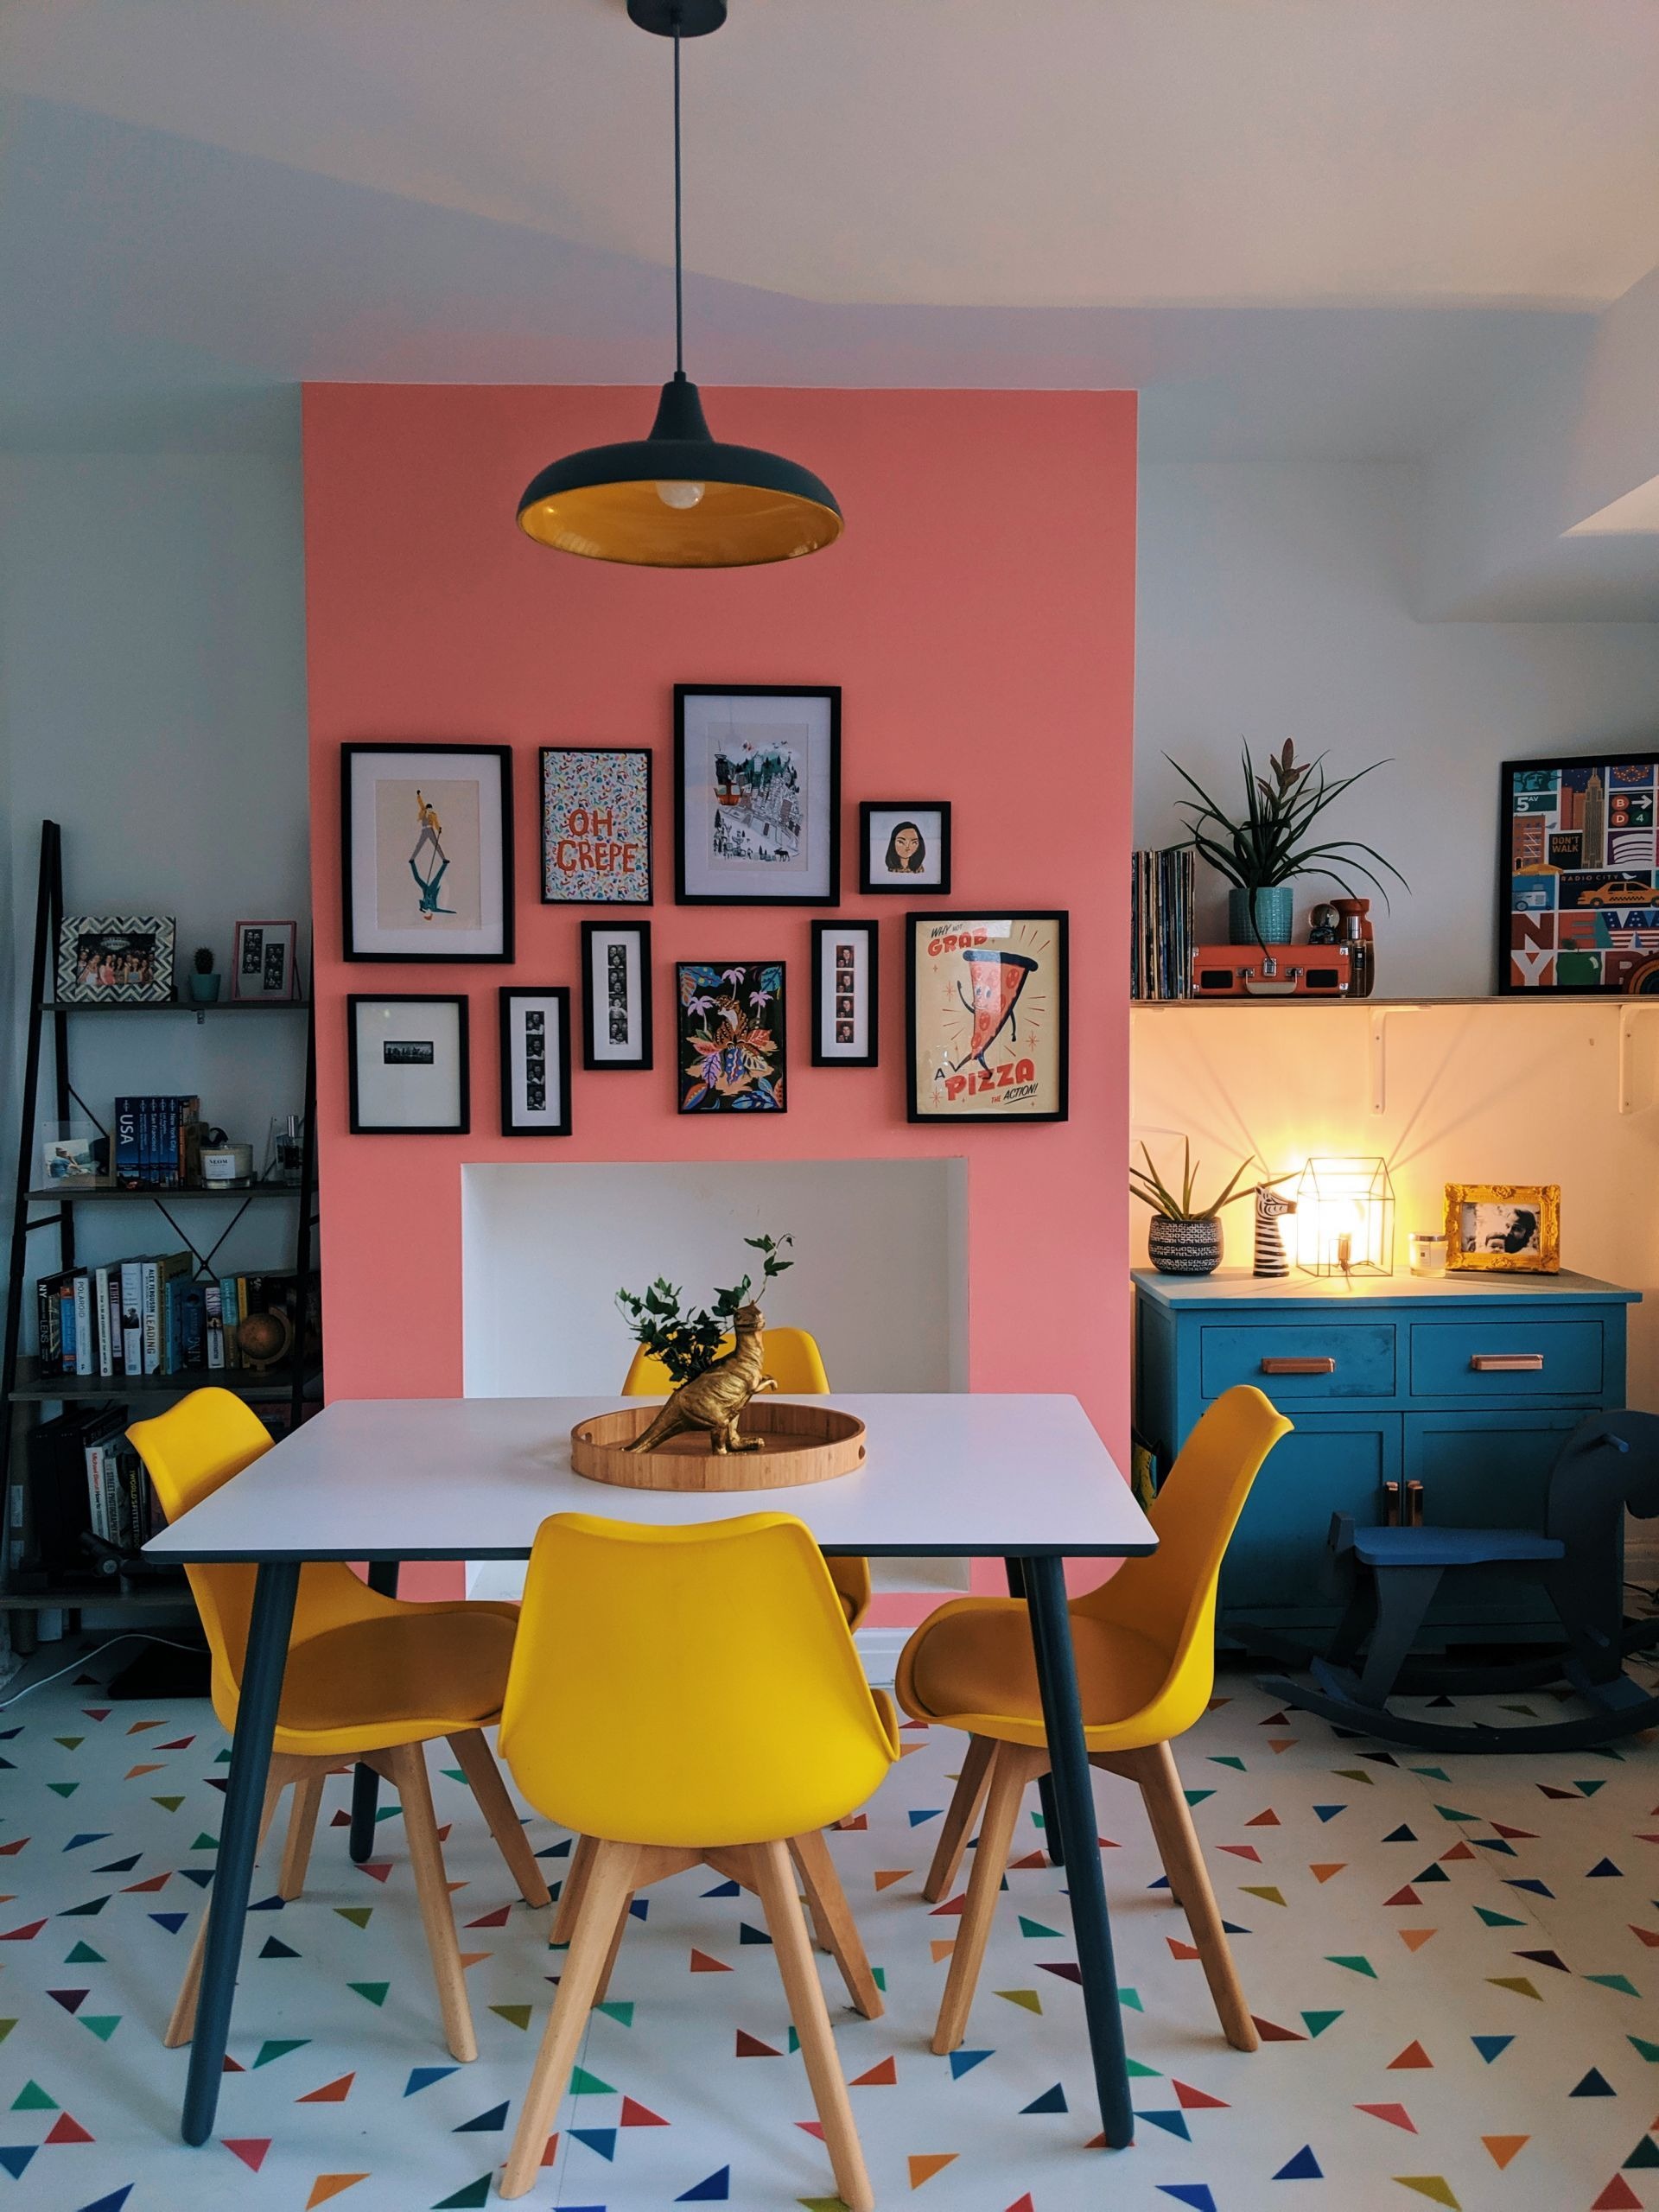 Lovely Dining Room with Cheerful Colors